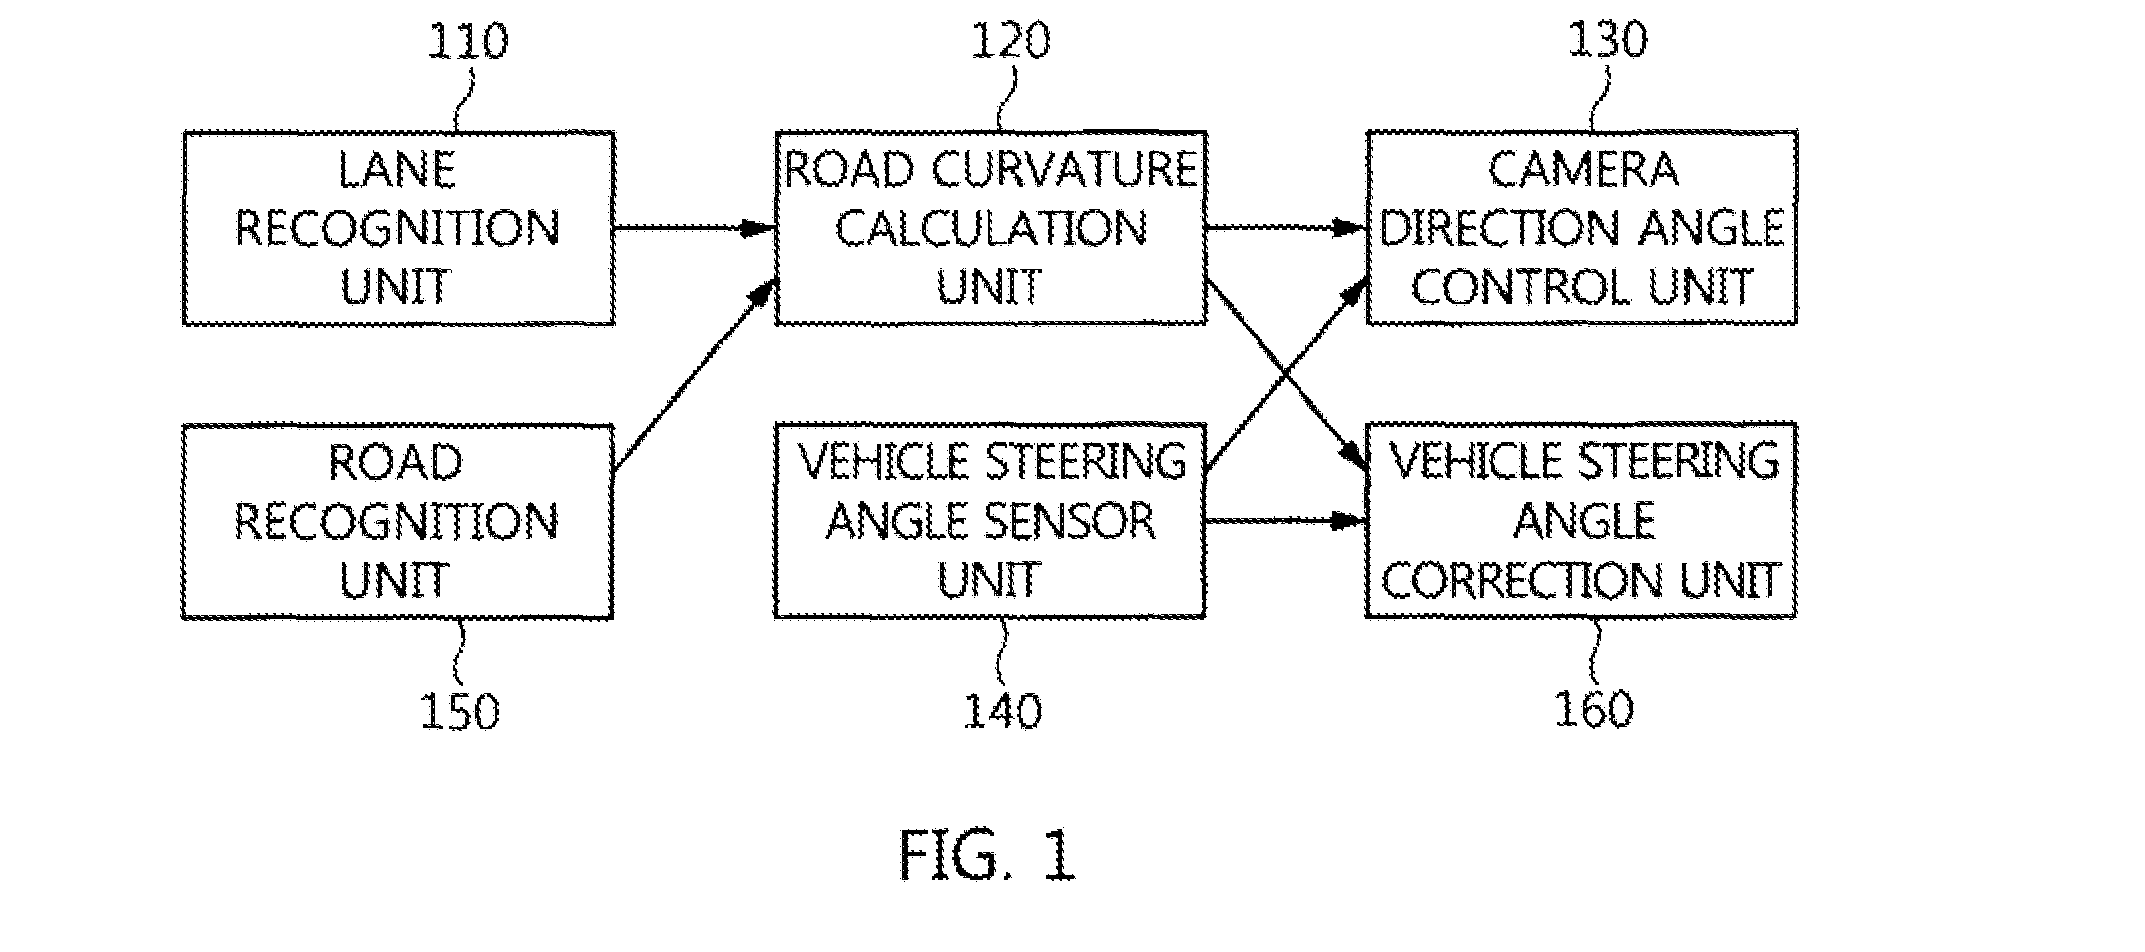 Lane tracking apparatus and method using camera direction control